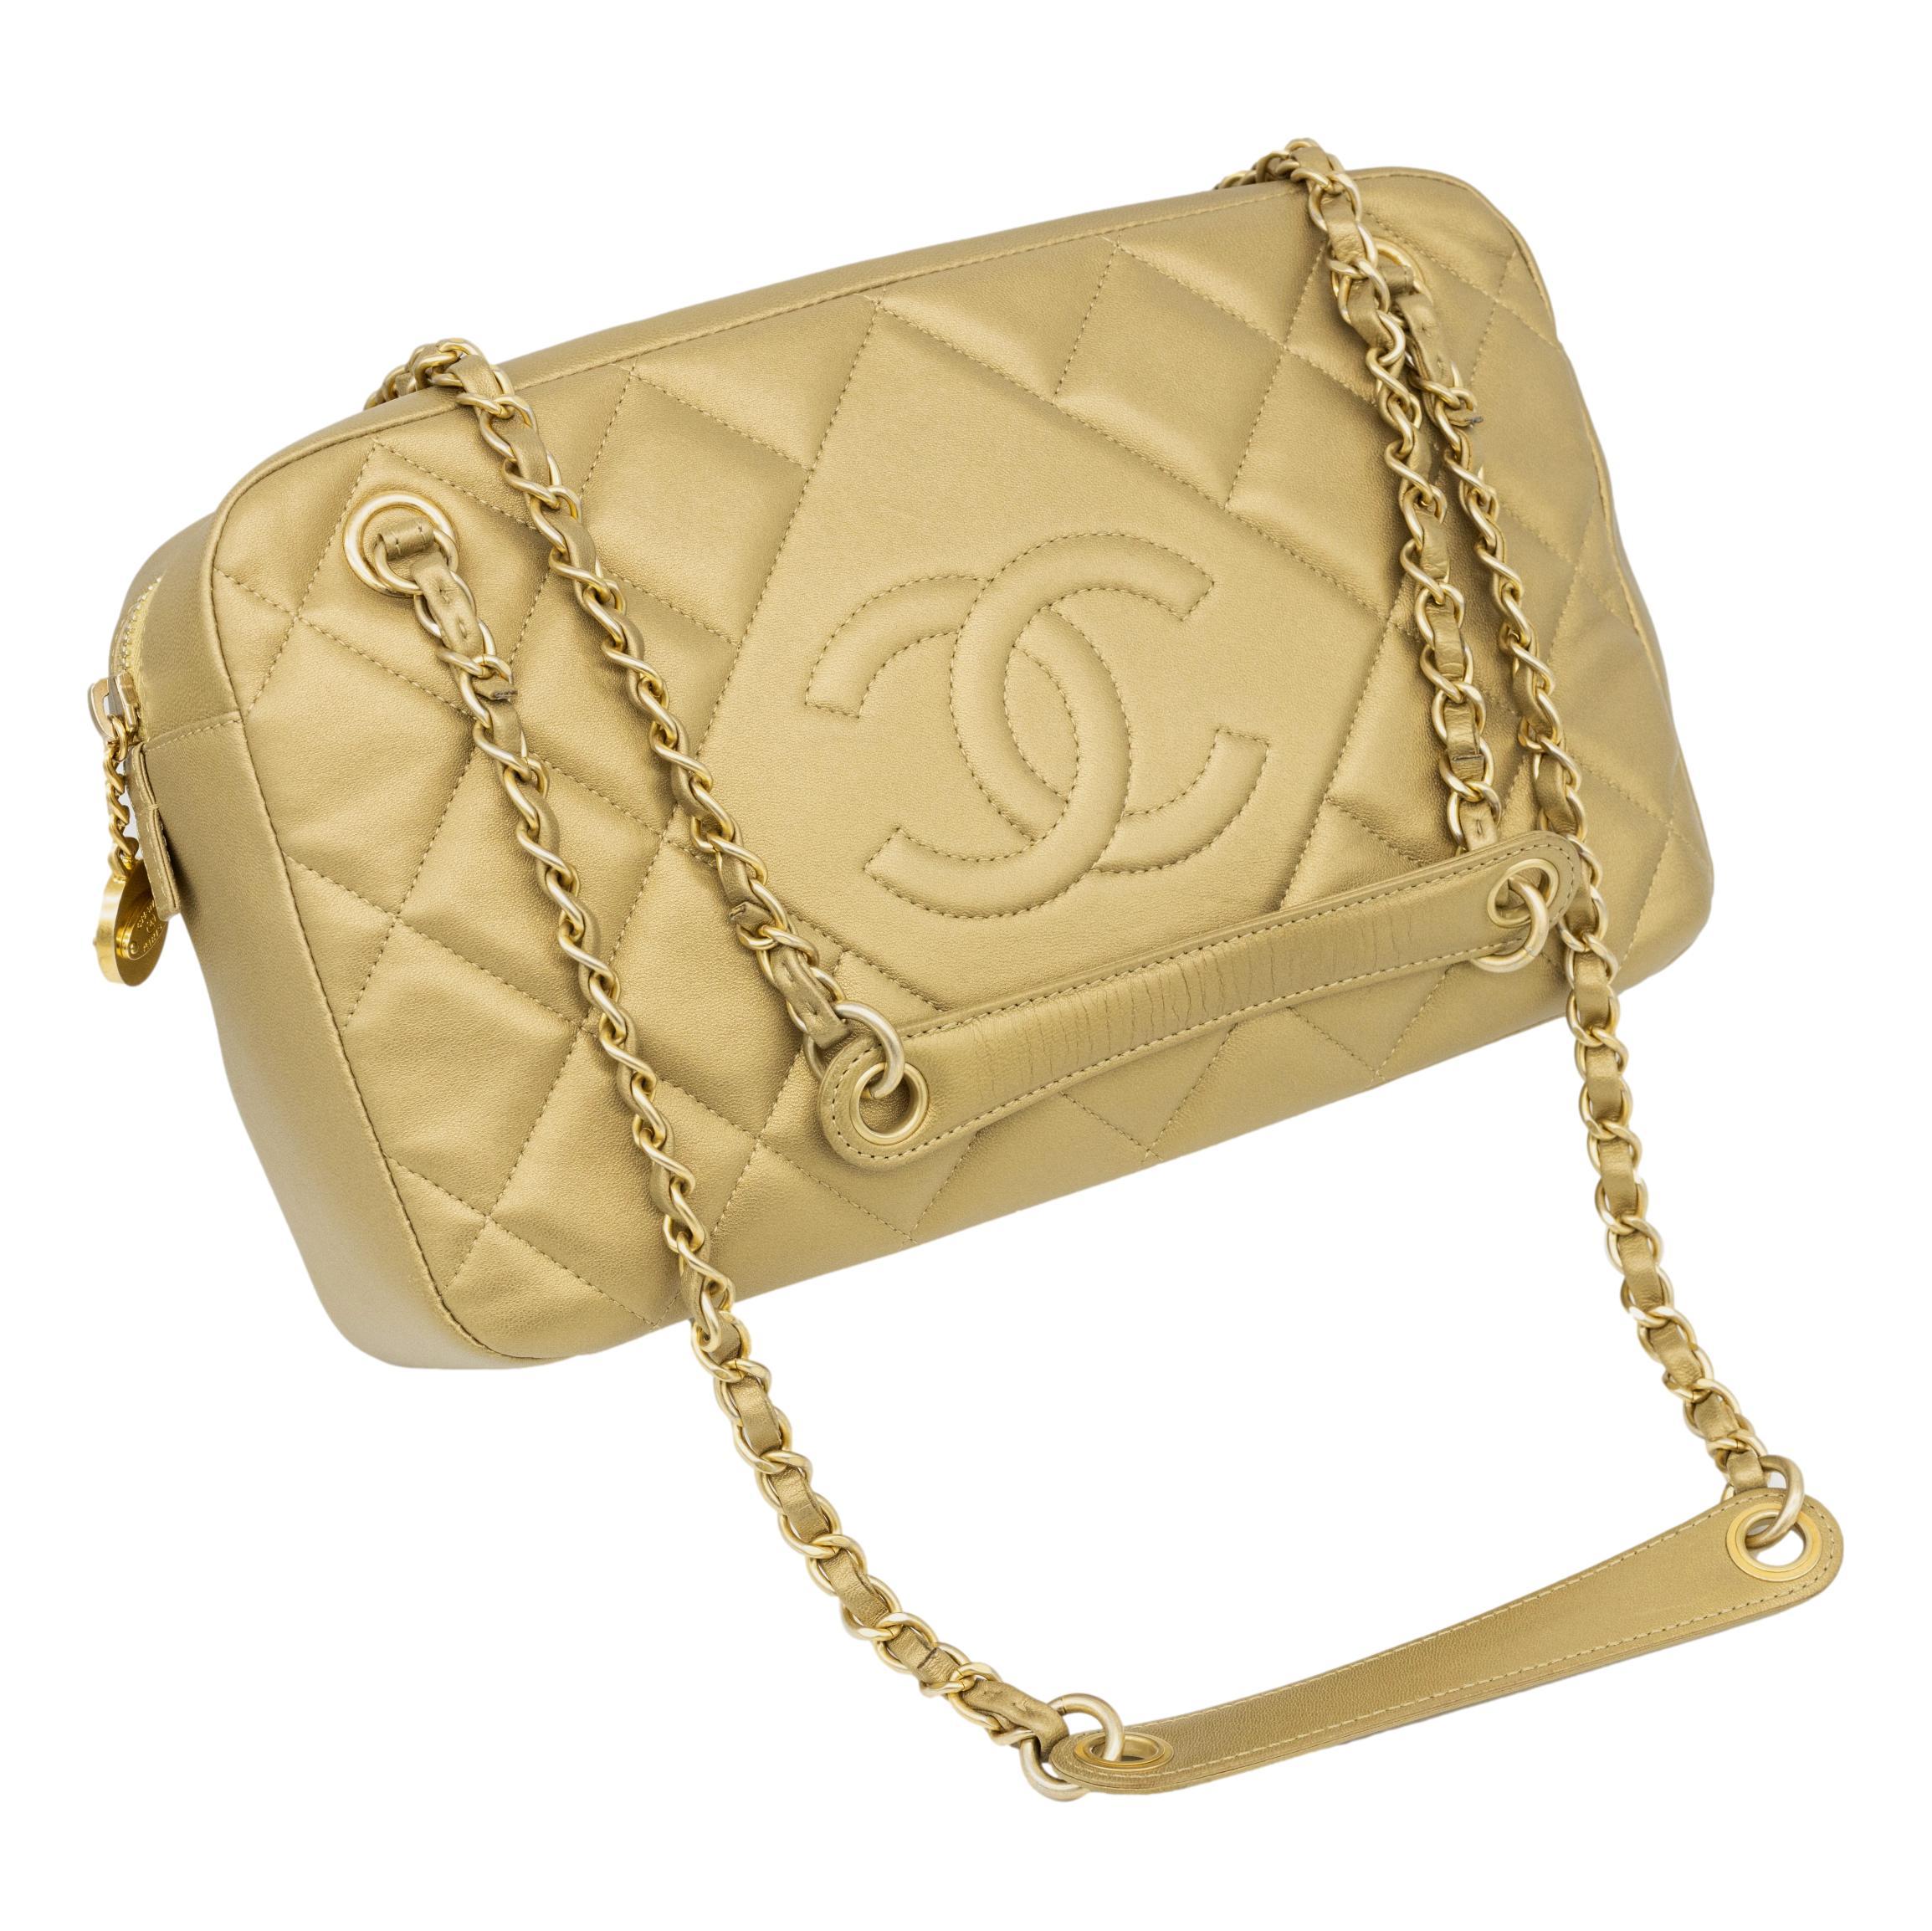 Chanel Diamond Quilted Metallic Gold Lambskin CC Camera Bag, 2014. This highly coveted and infamous crossbody camera bag was produced in 2014 baring a serial code of 